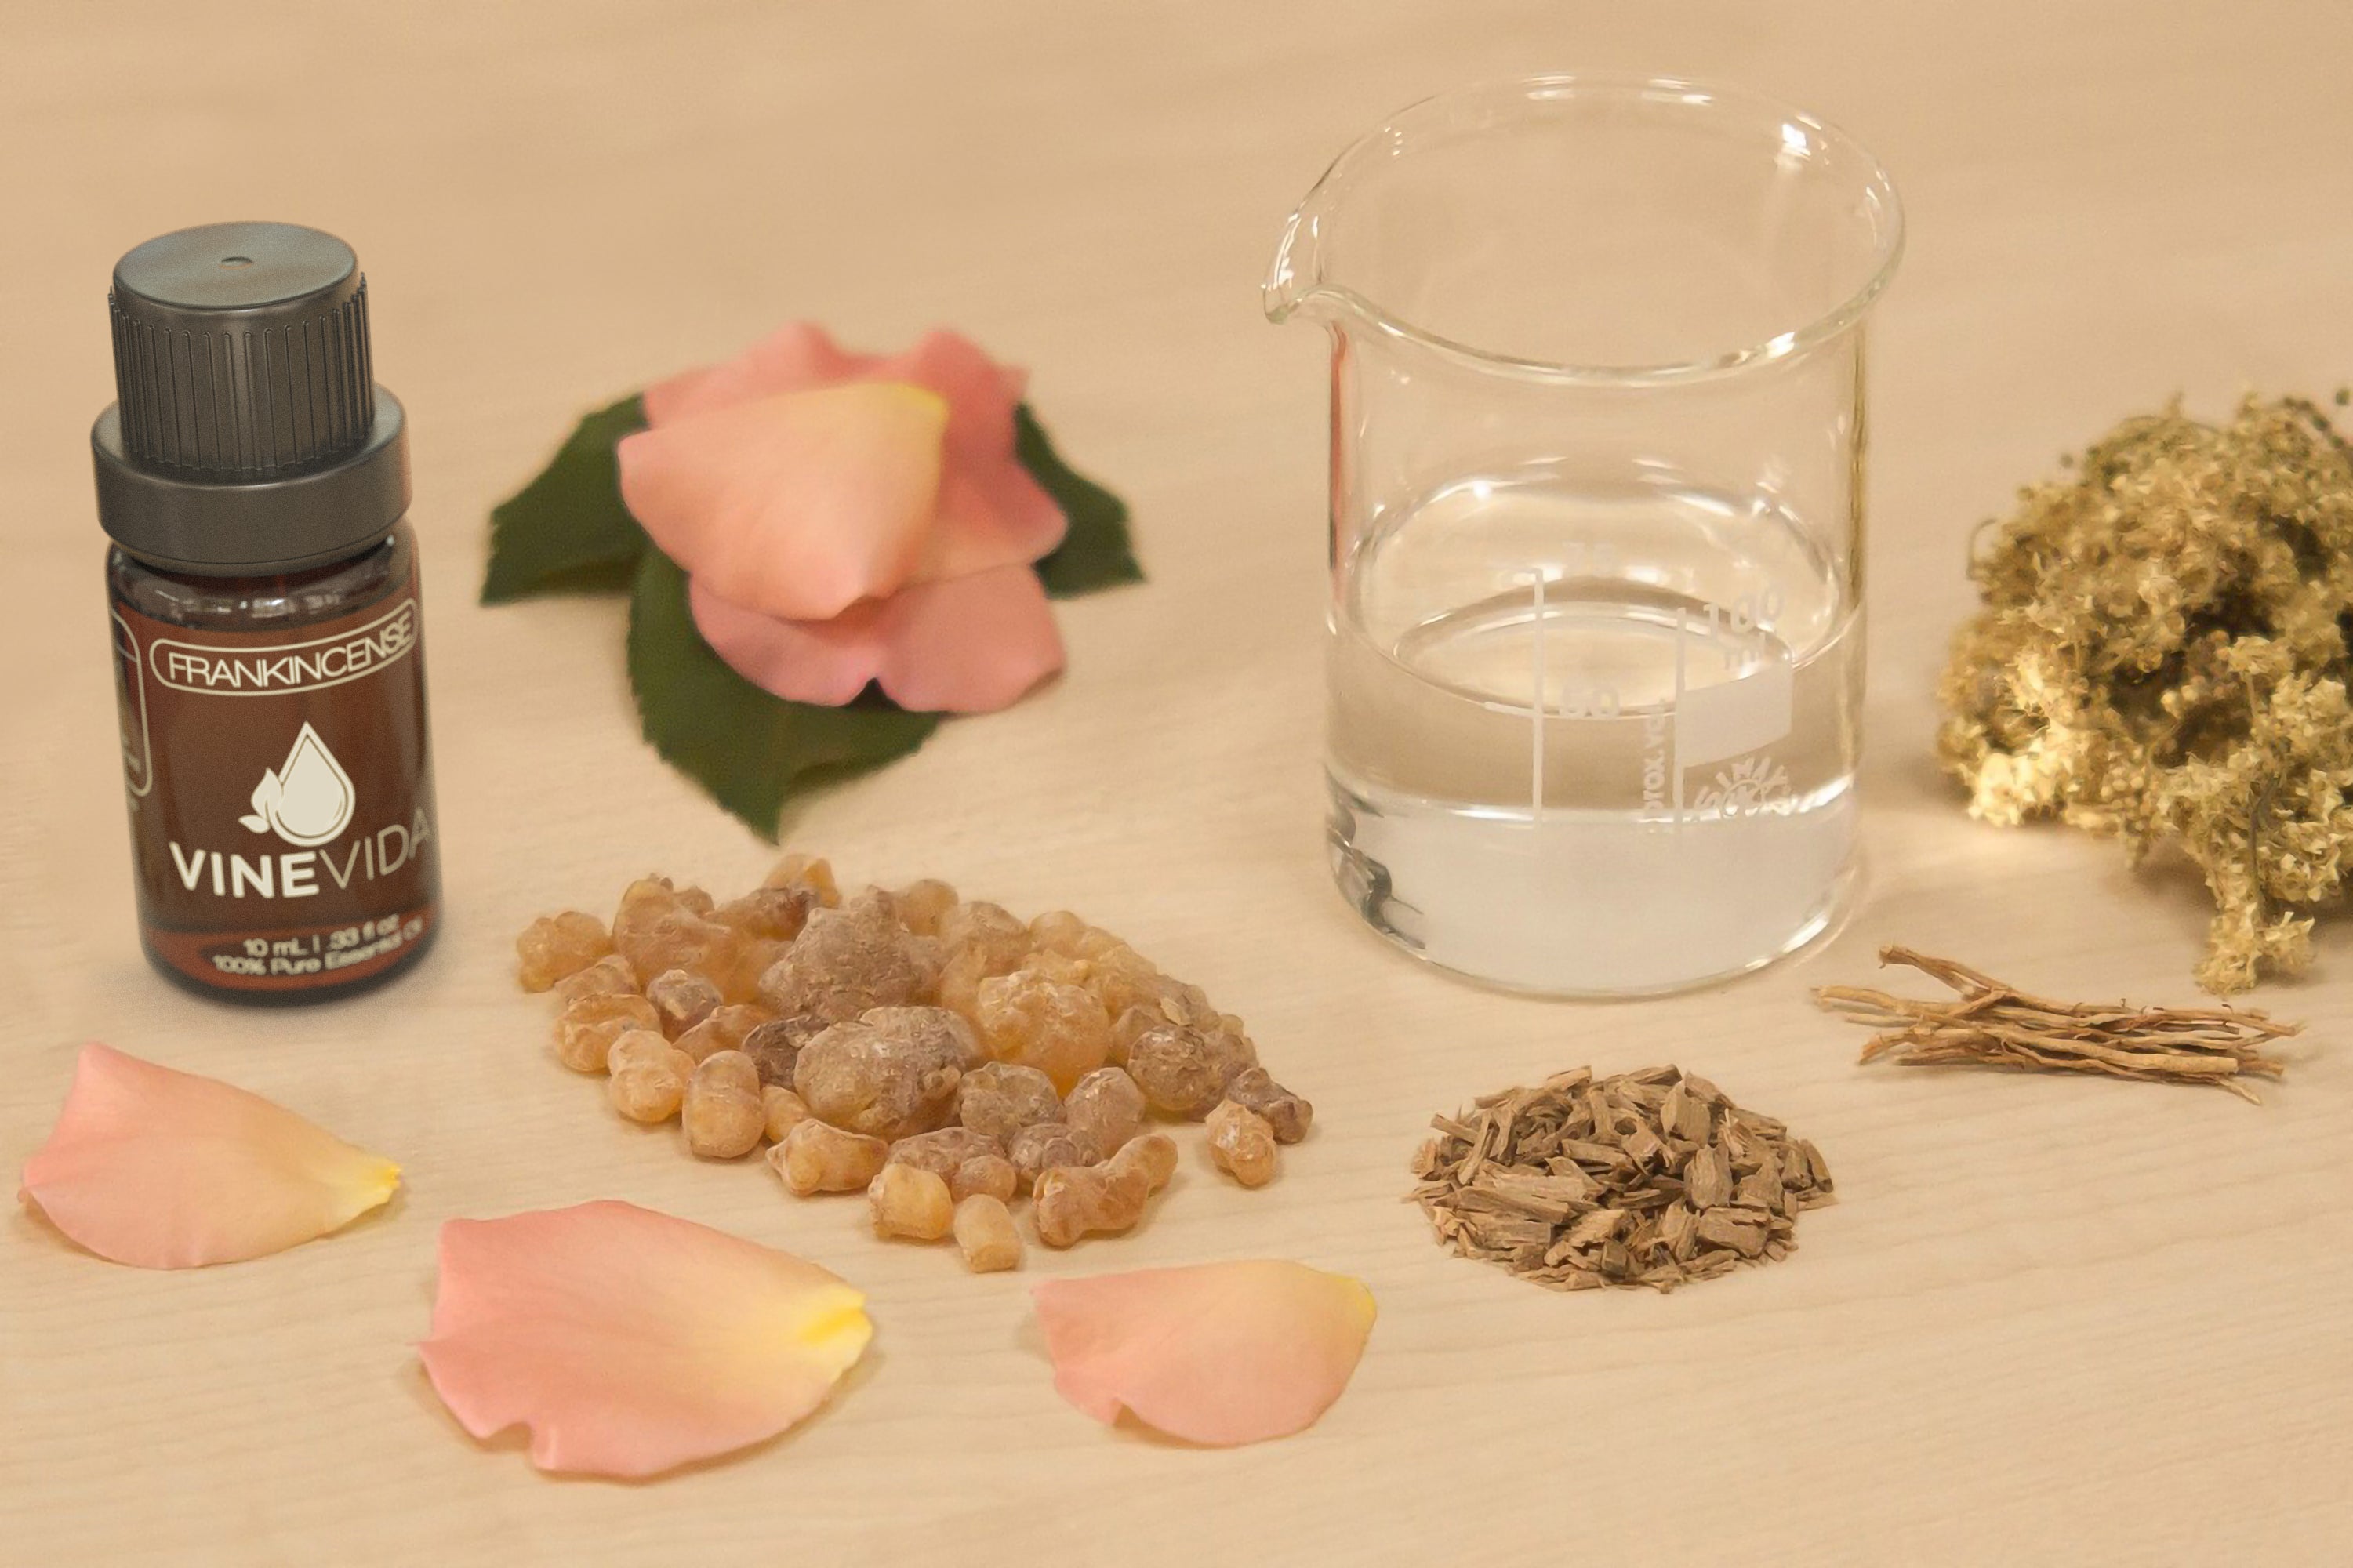 Top 5 Frankincense Essential Oil Blends – The Best Uses of the Oil